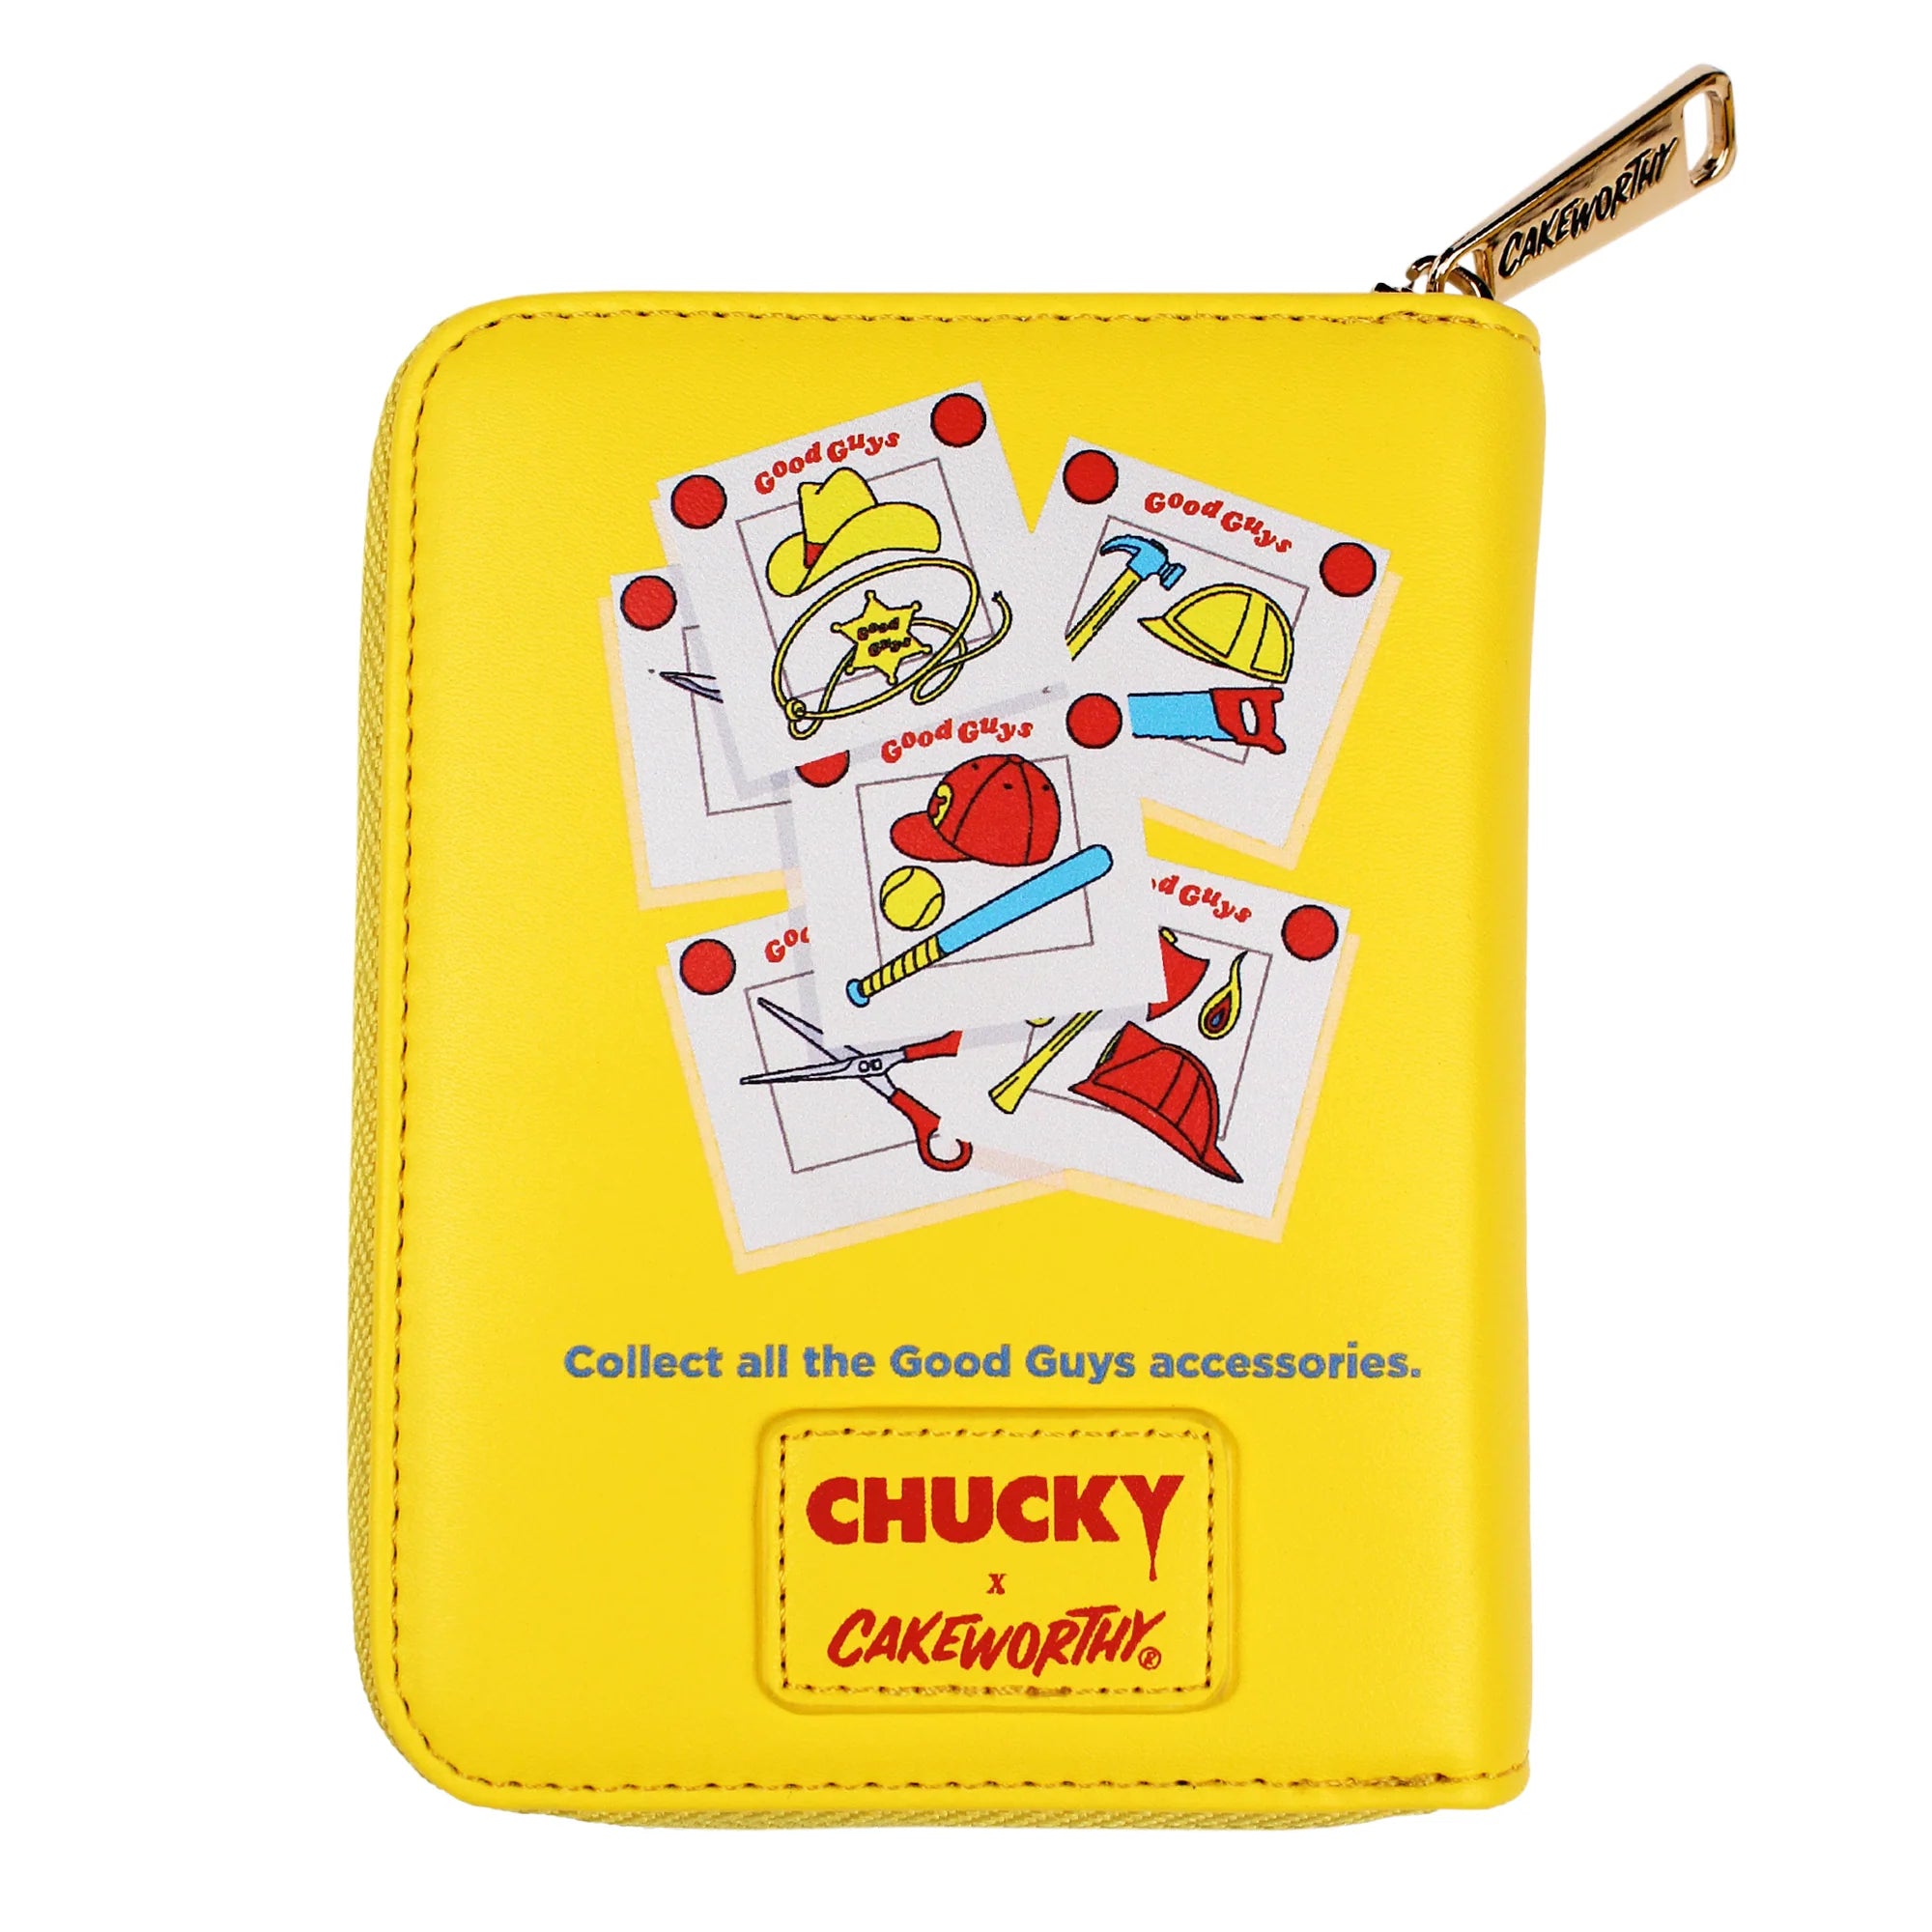 Cakeworthy Child's Play Chucky Good Guy Doll Wallet